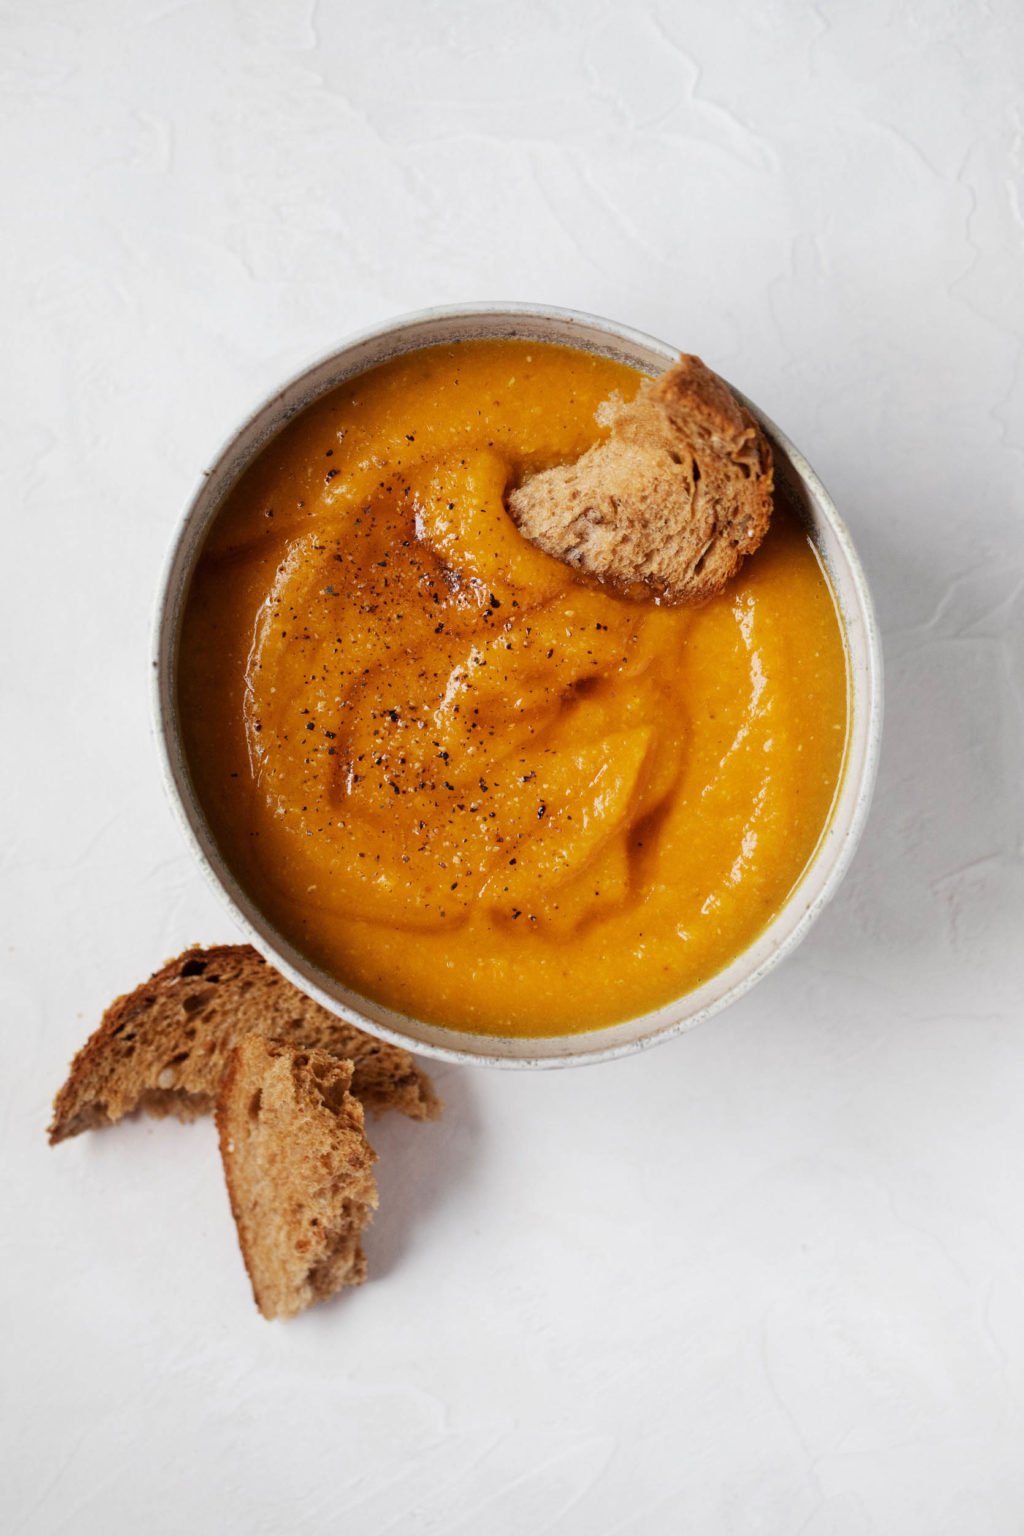 A plant based bowl of creamy, golden colored soup, with a small slice of bread dipped in for serving.